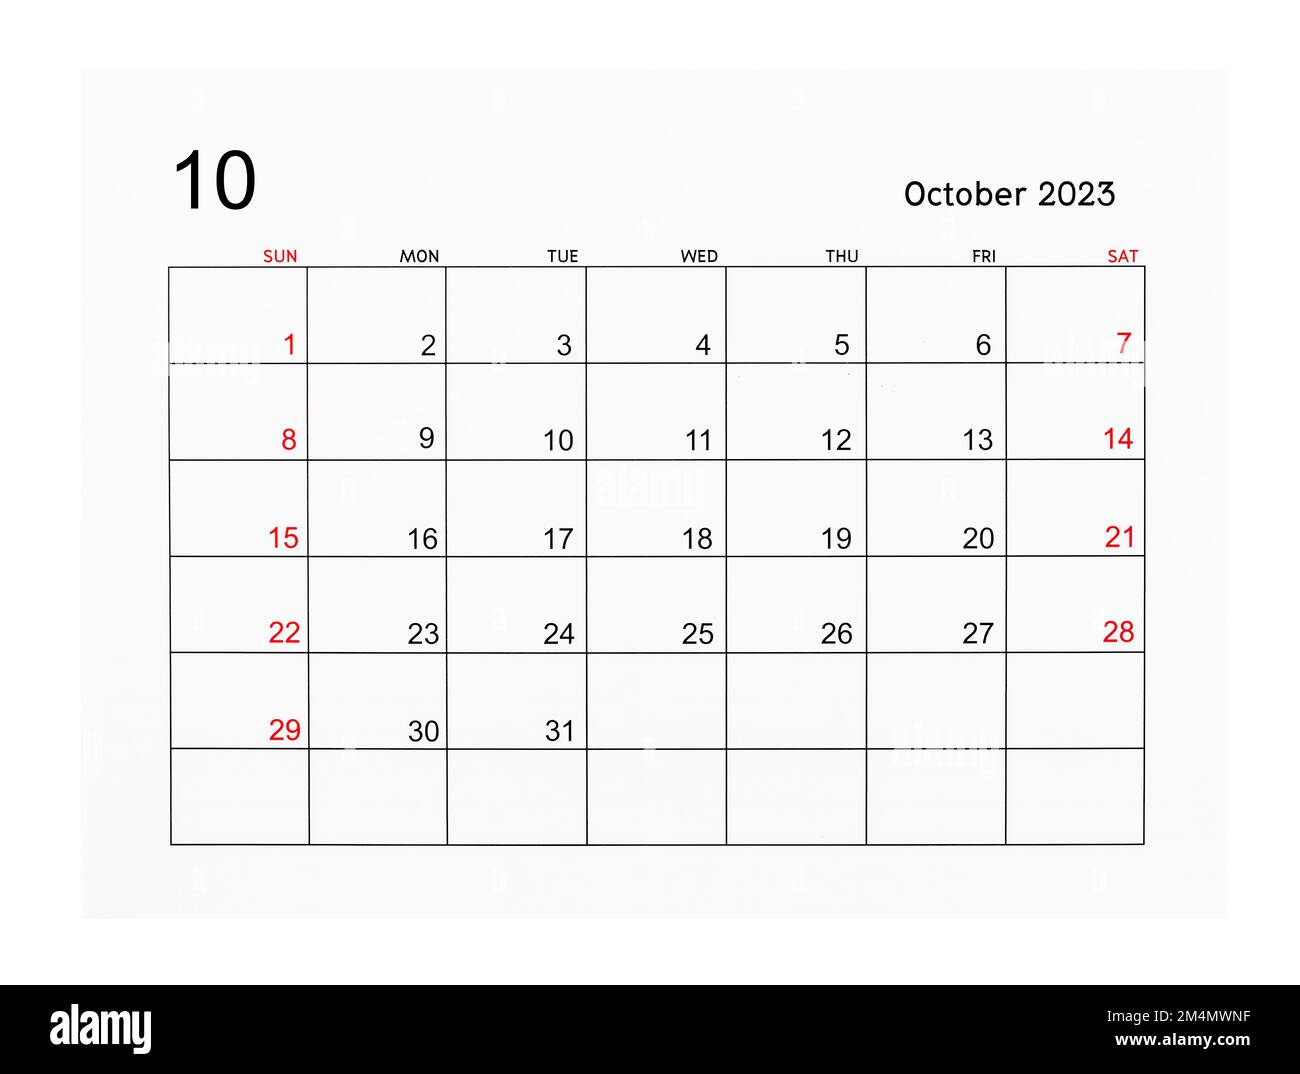 2023 calendar Cut Out Stock Images & Pictures - Alamy